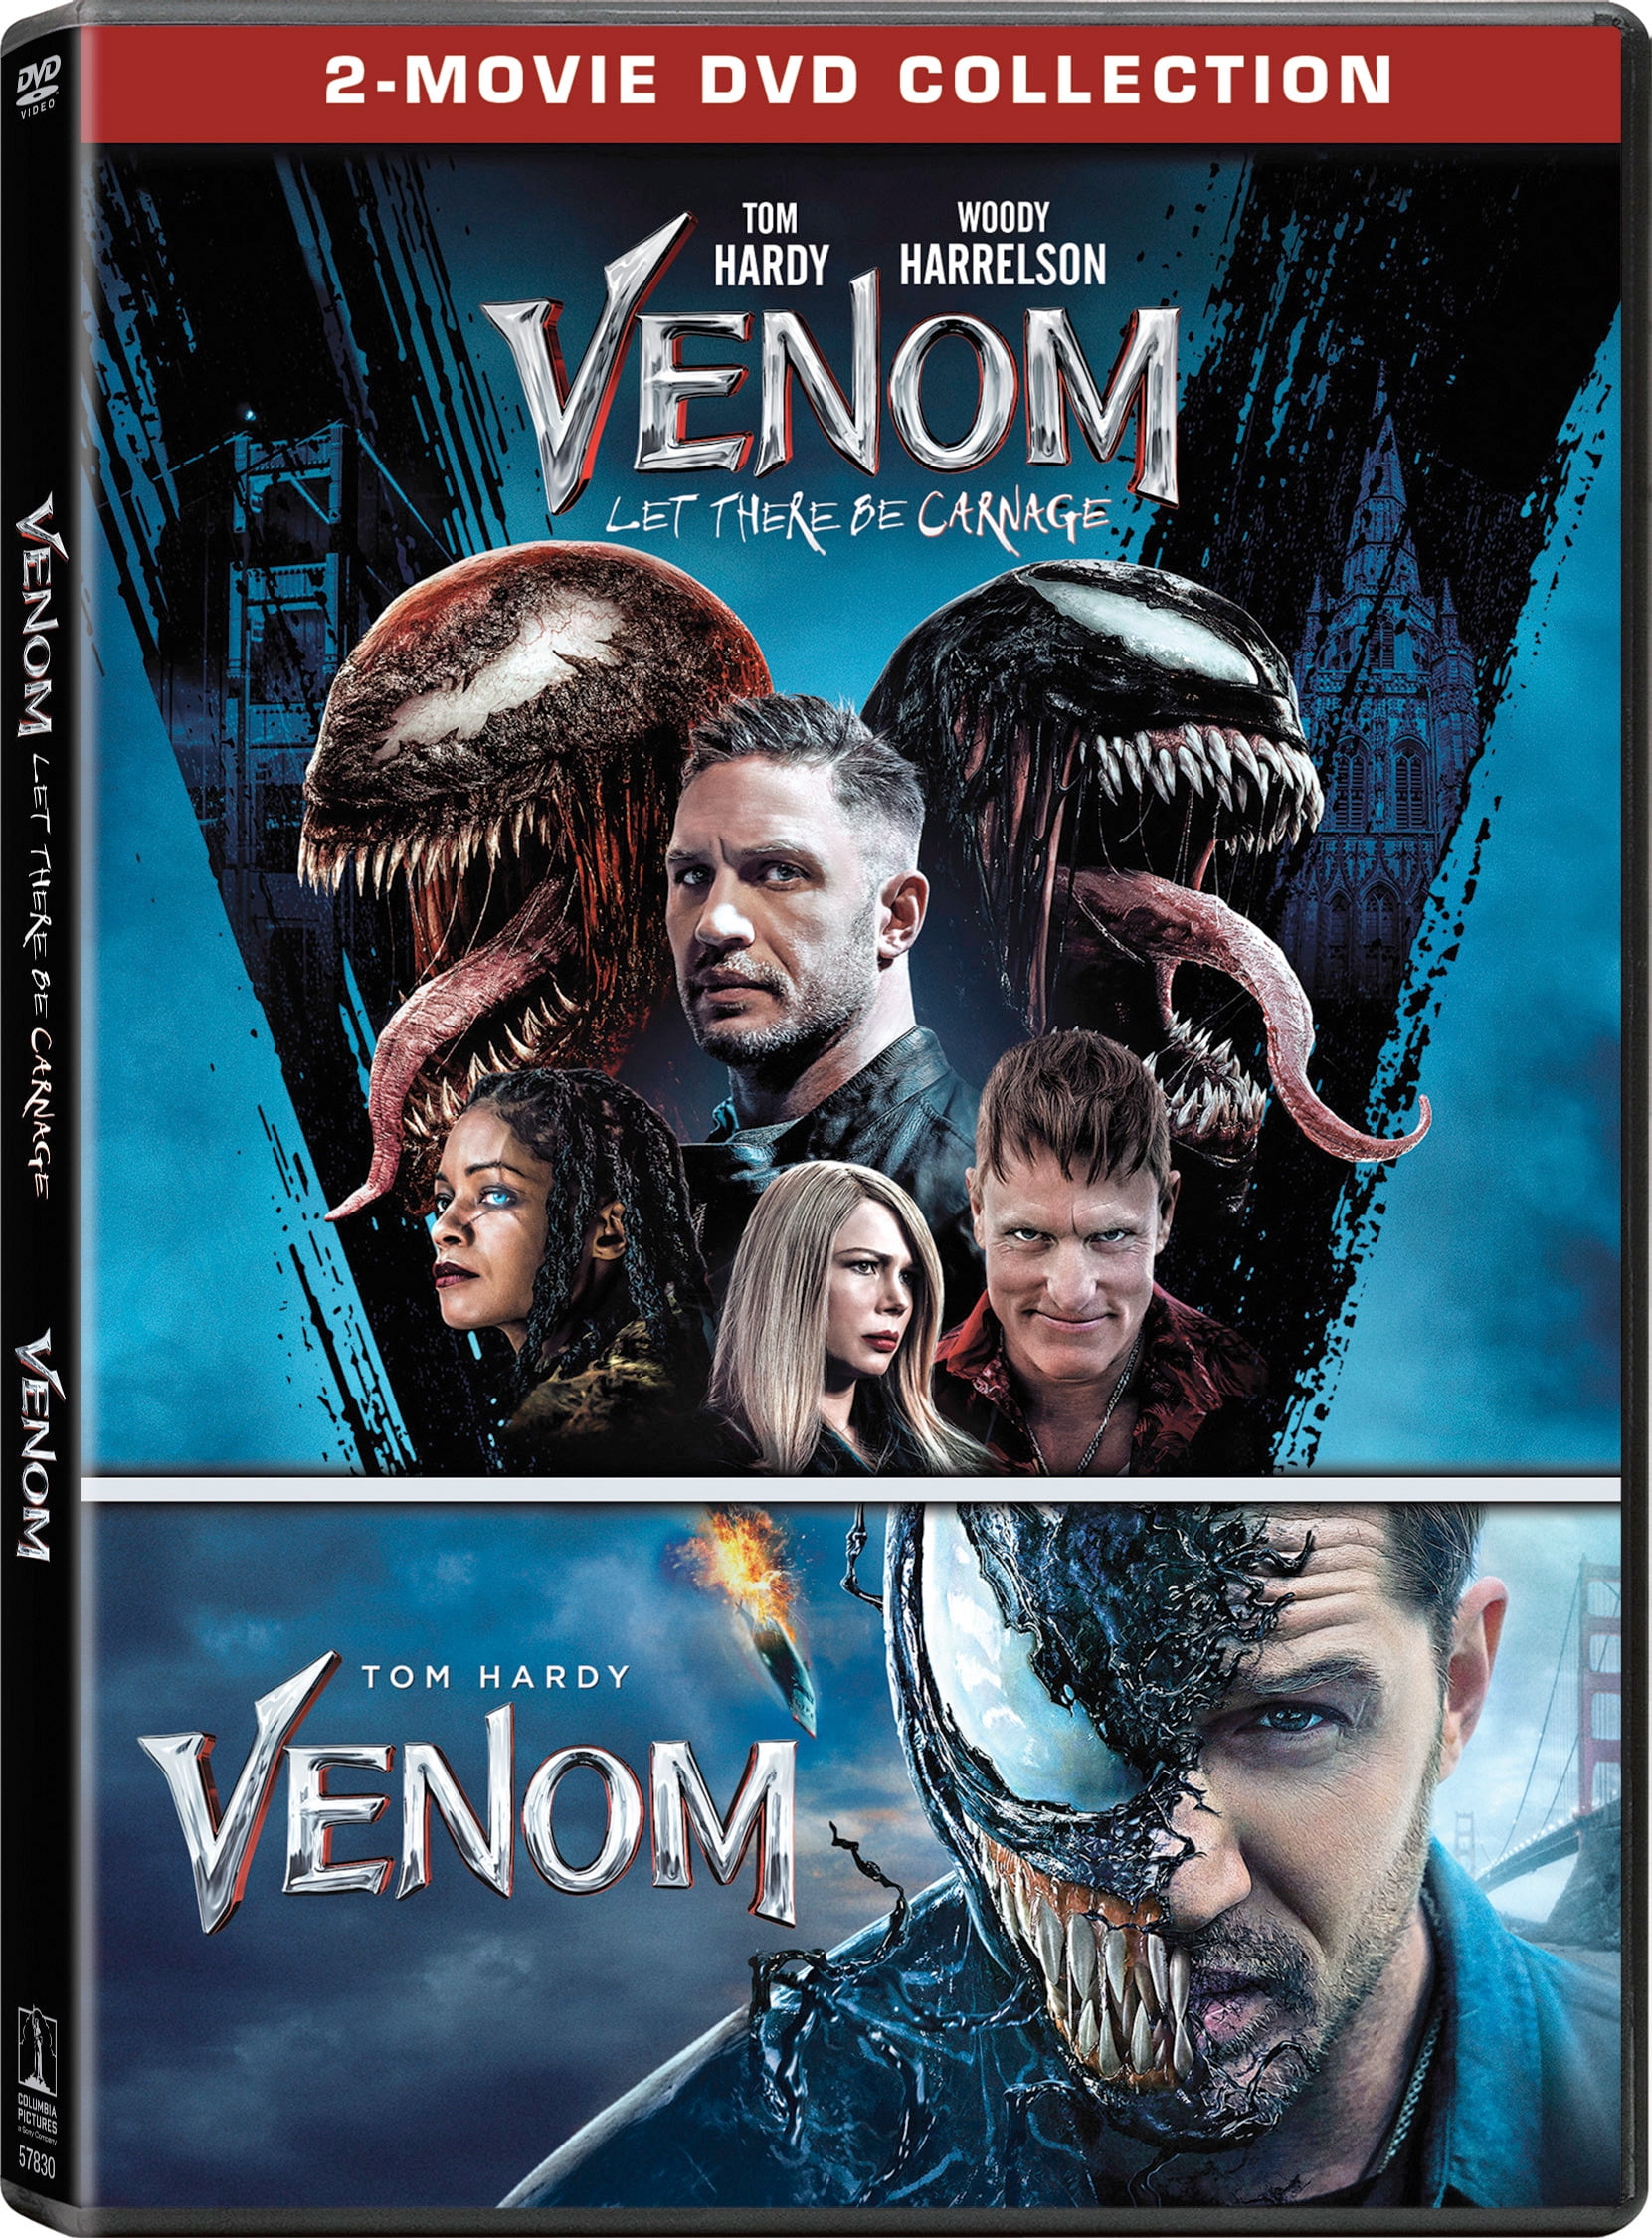 Venom/Venom: Let There Be Carnage (Multi-Feature) (Walmart Exclusive) (DVD)